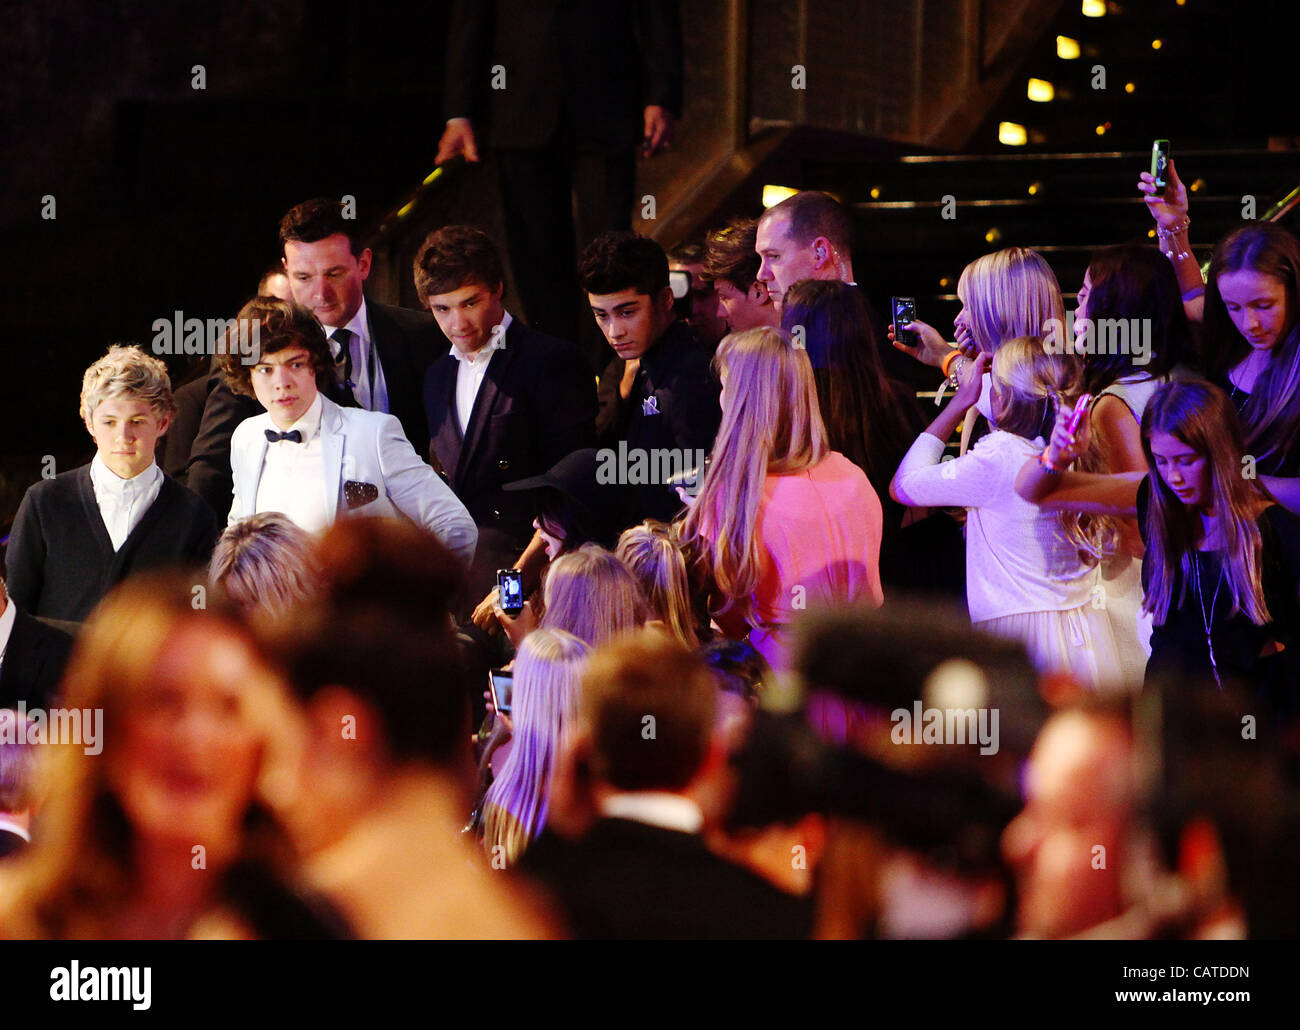 April 15, 2012 - Melbourne, NSW, Australia - Fans scream as memebers of the band One Direction NIALL HORAN and HARRY STYLES arrive at the 2012 TV Week Logie Awards in Melbourne at the Crown Casino. (Credit Image: © Marianna Massey/ZUMAPRESS.com) Stock Photo